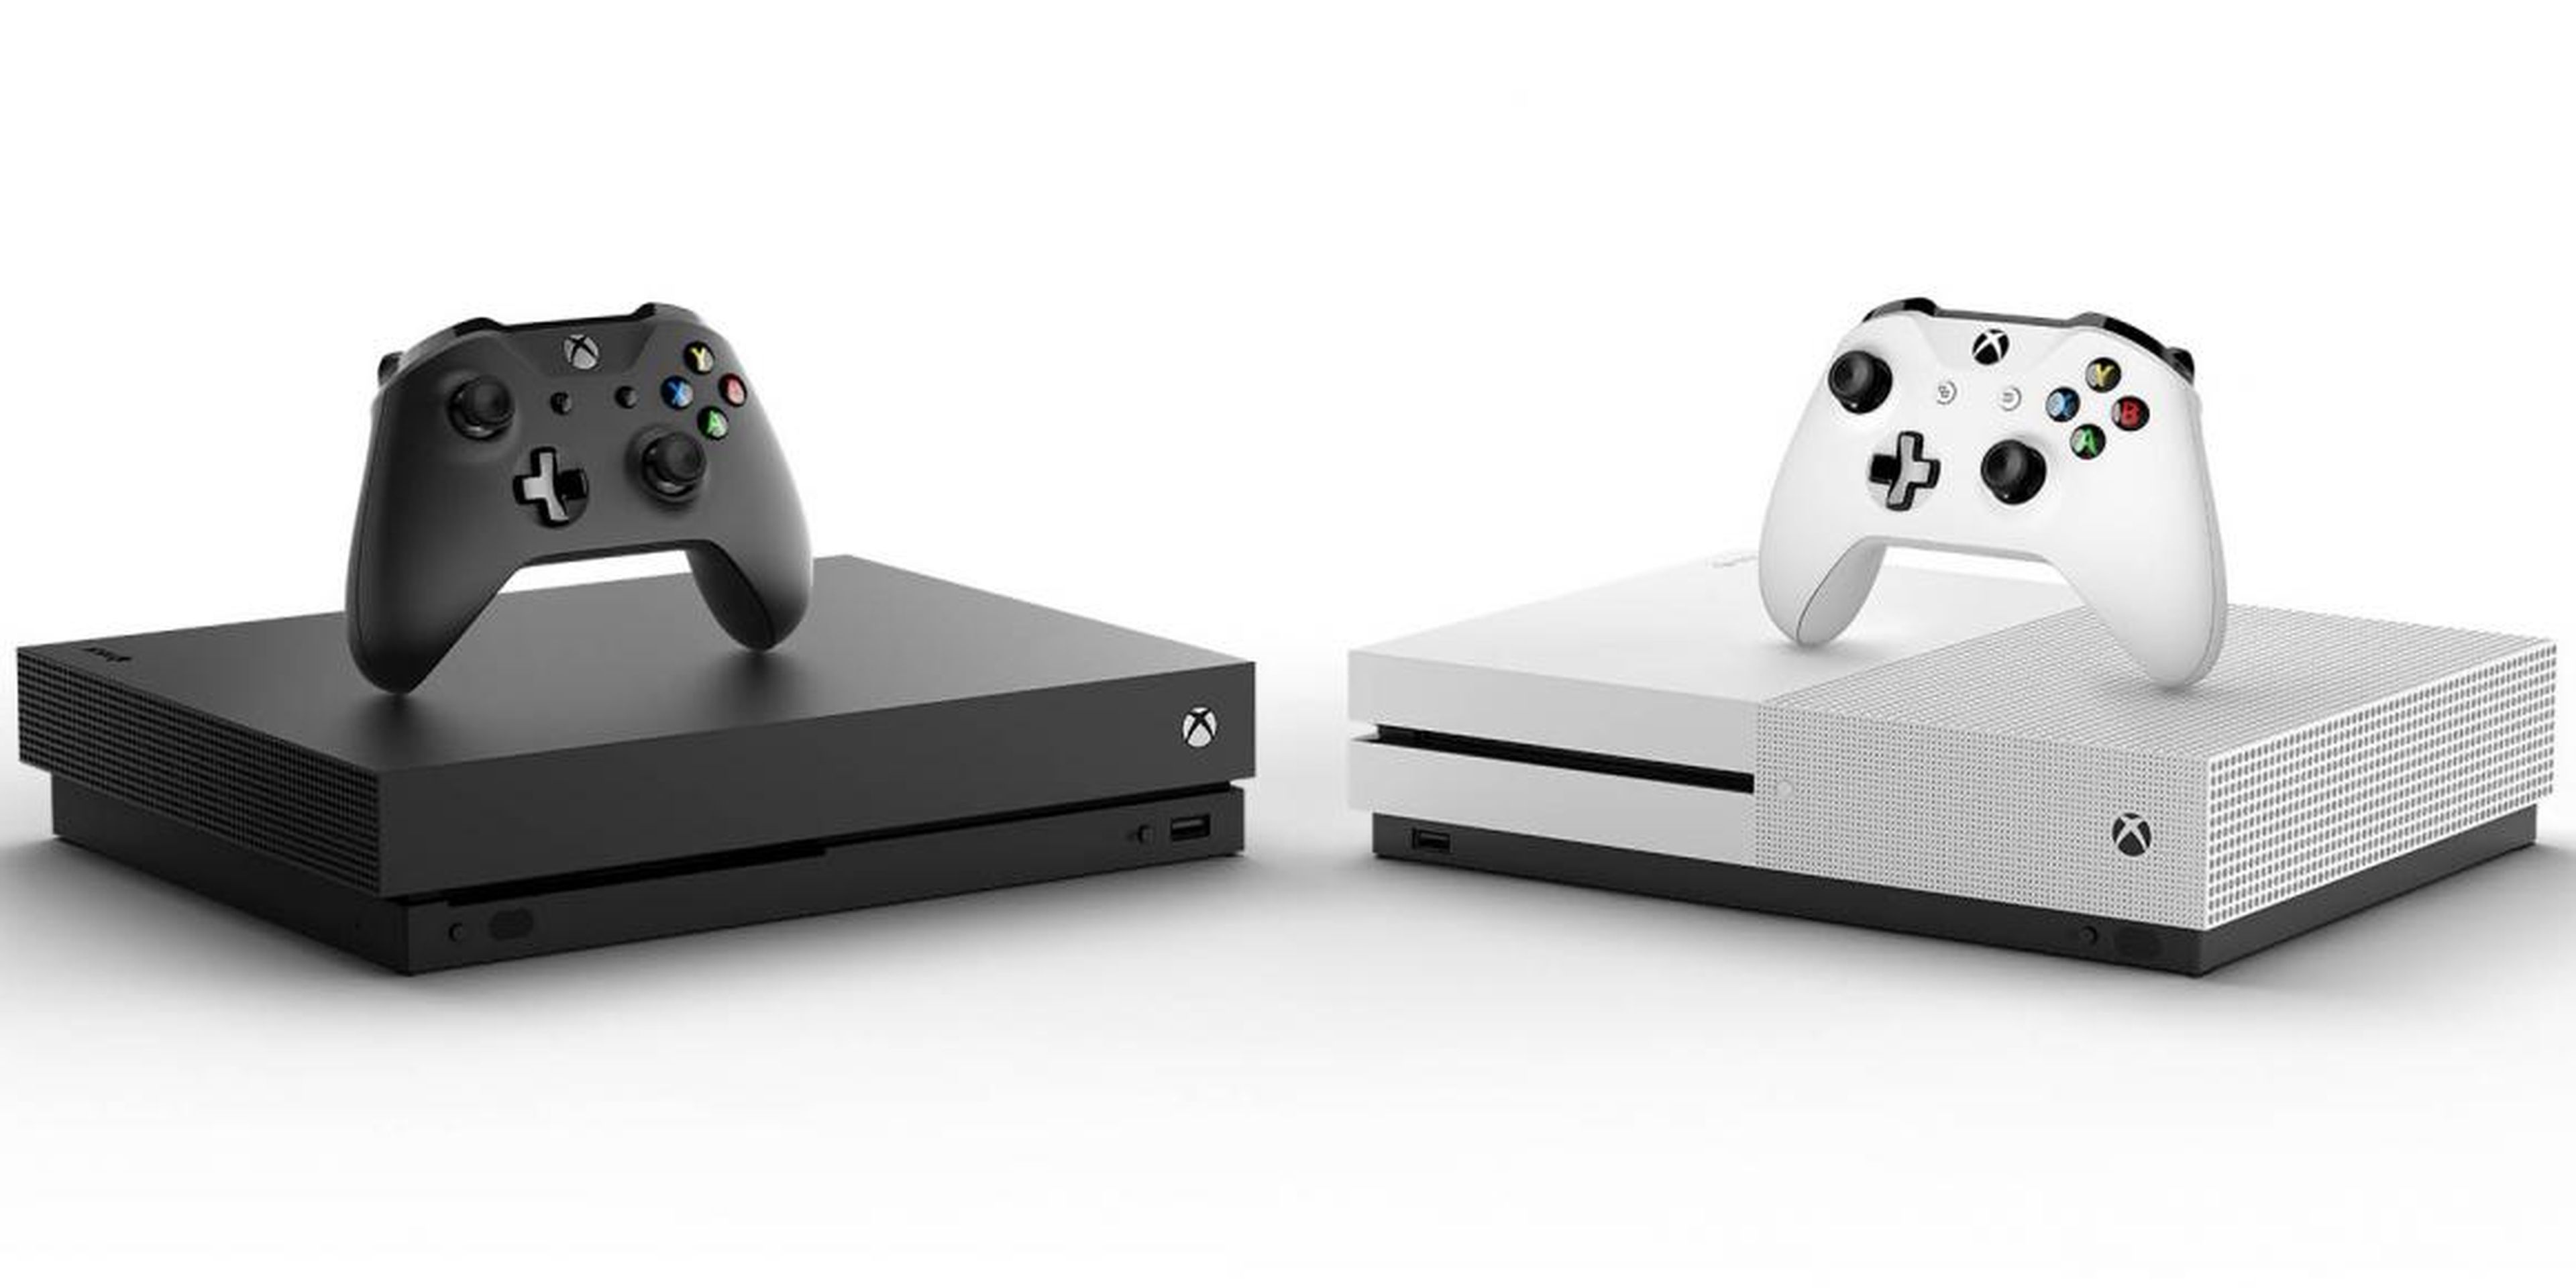 The Xbox One X (left) and Xbox One S (right).